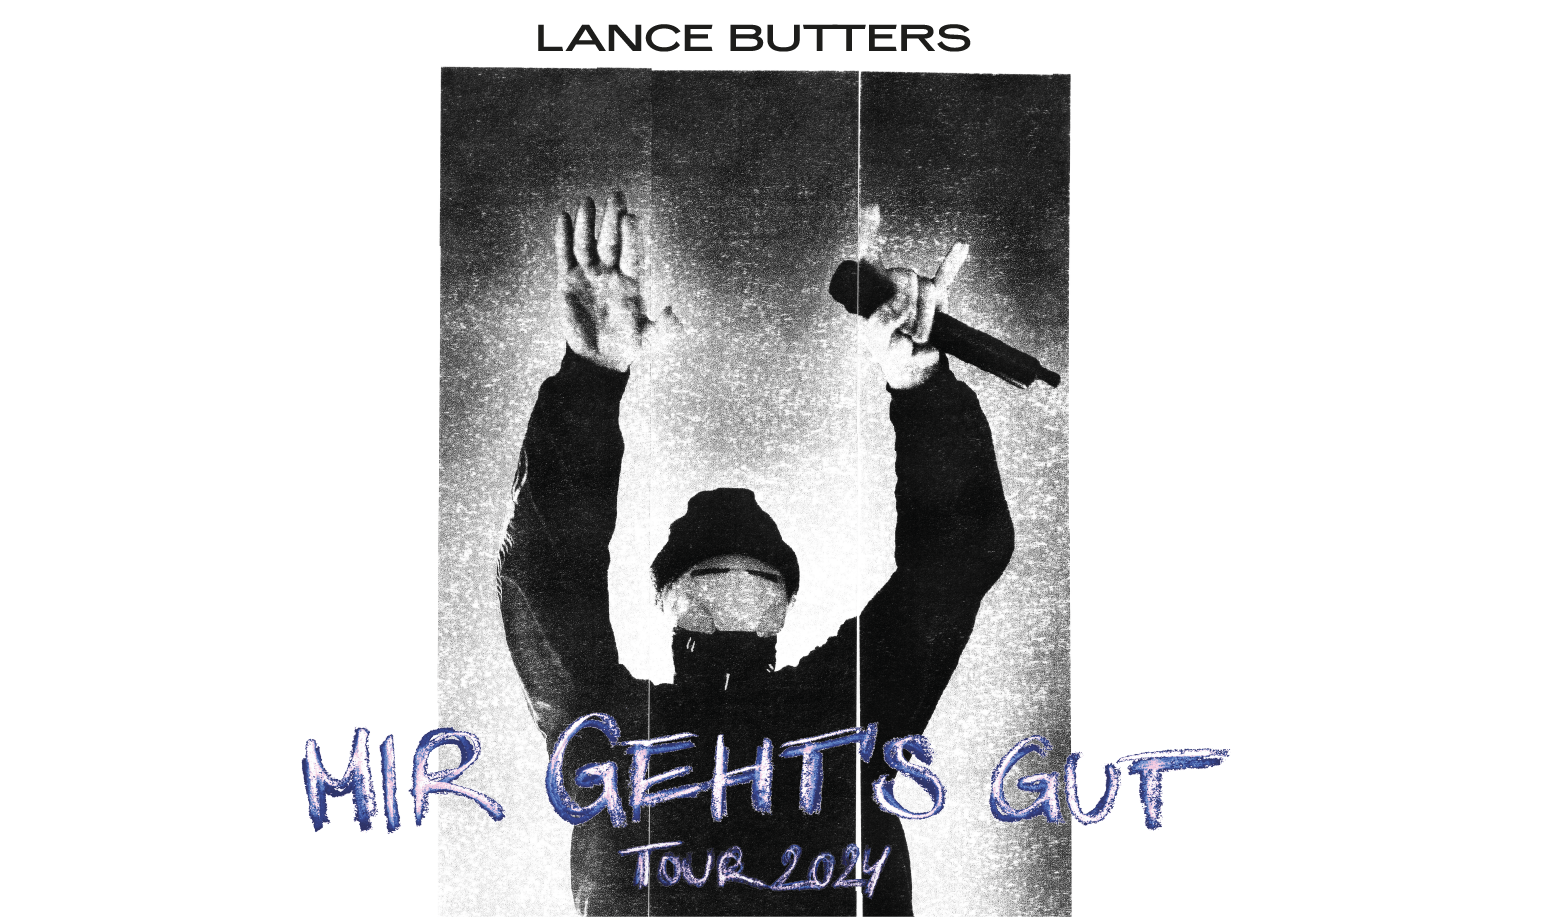 LANCE BUTTERS